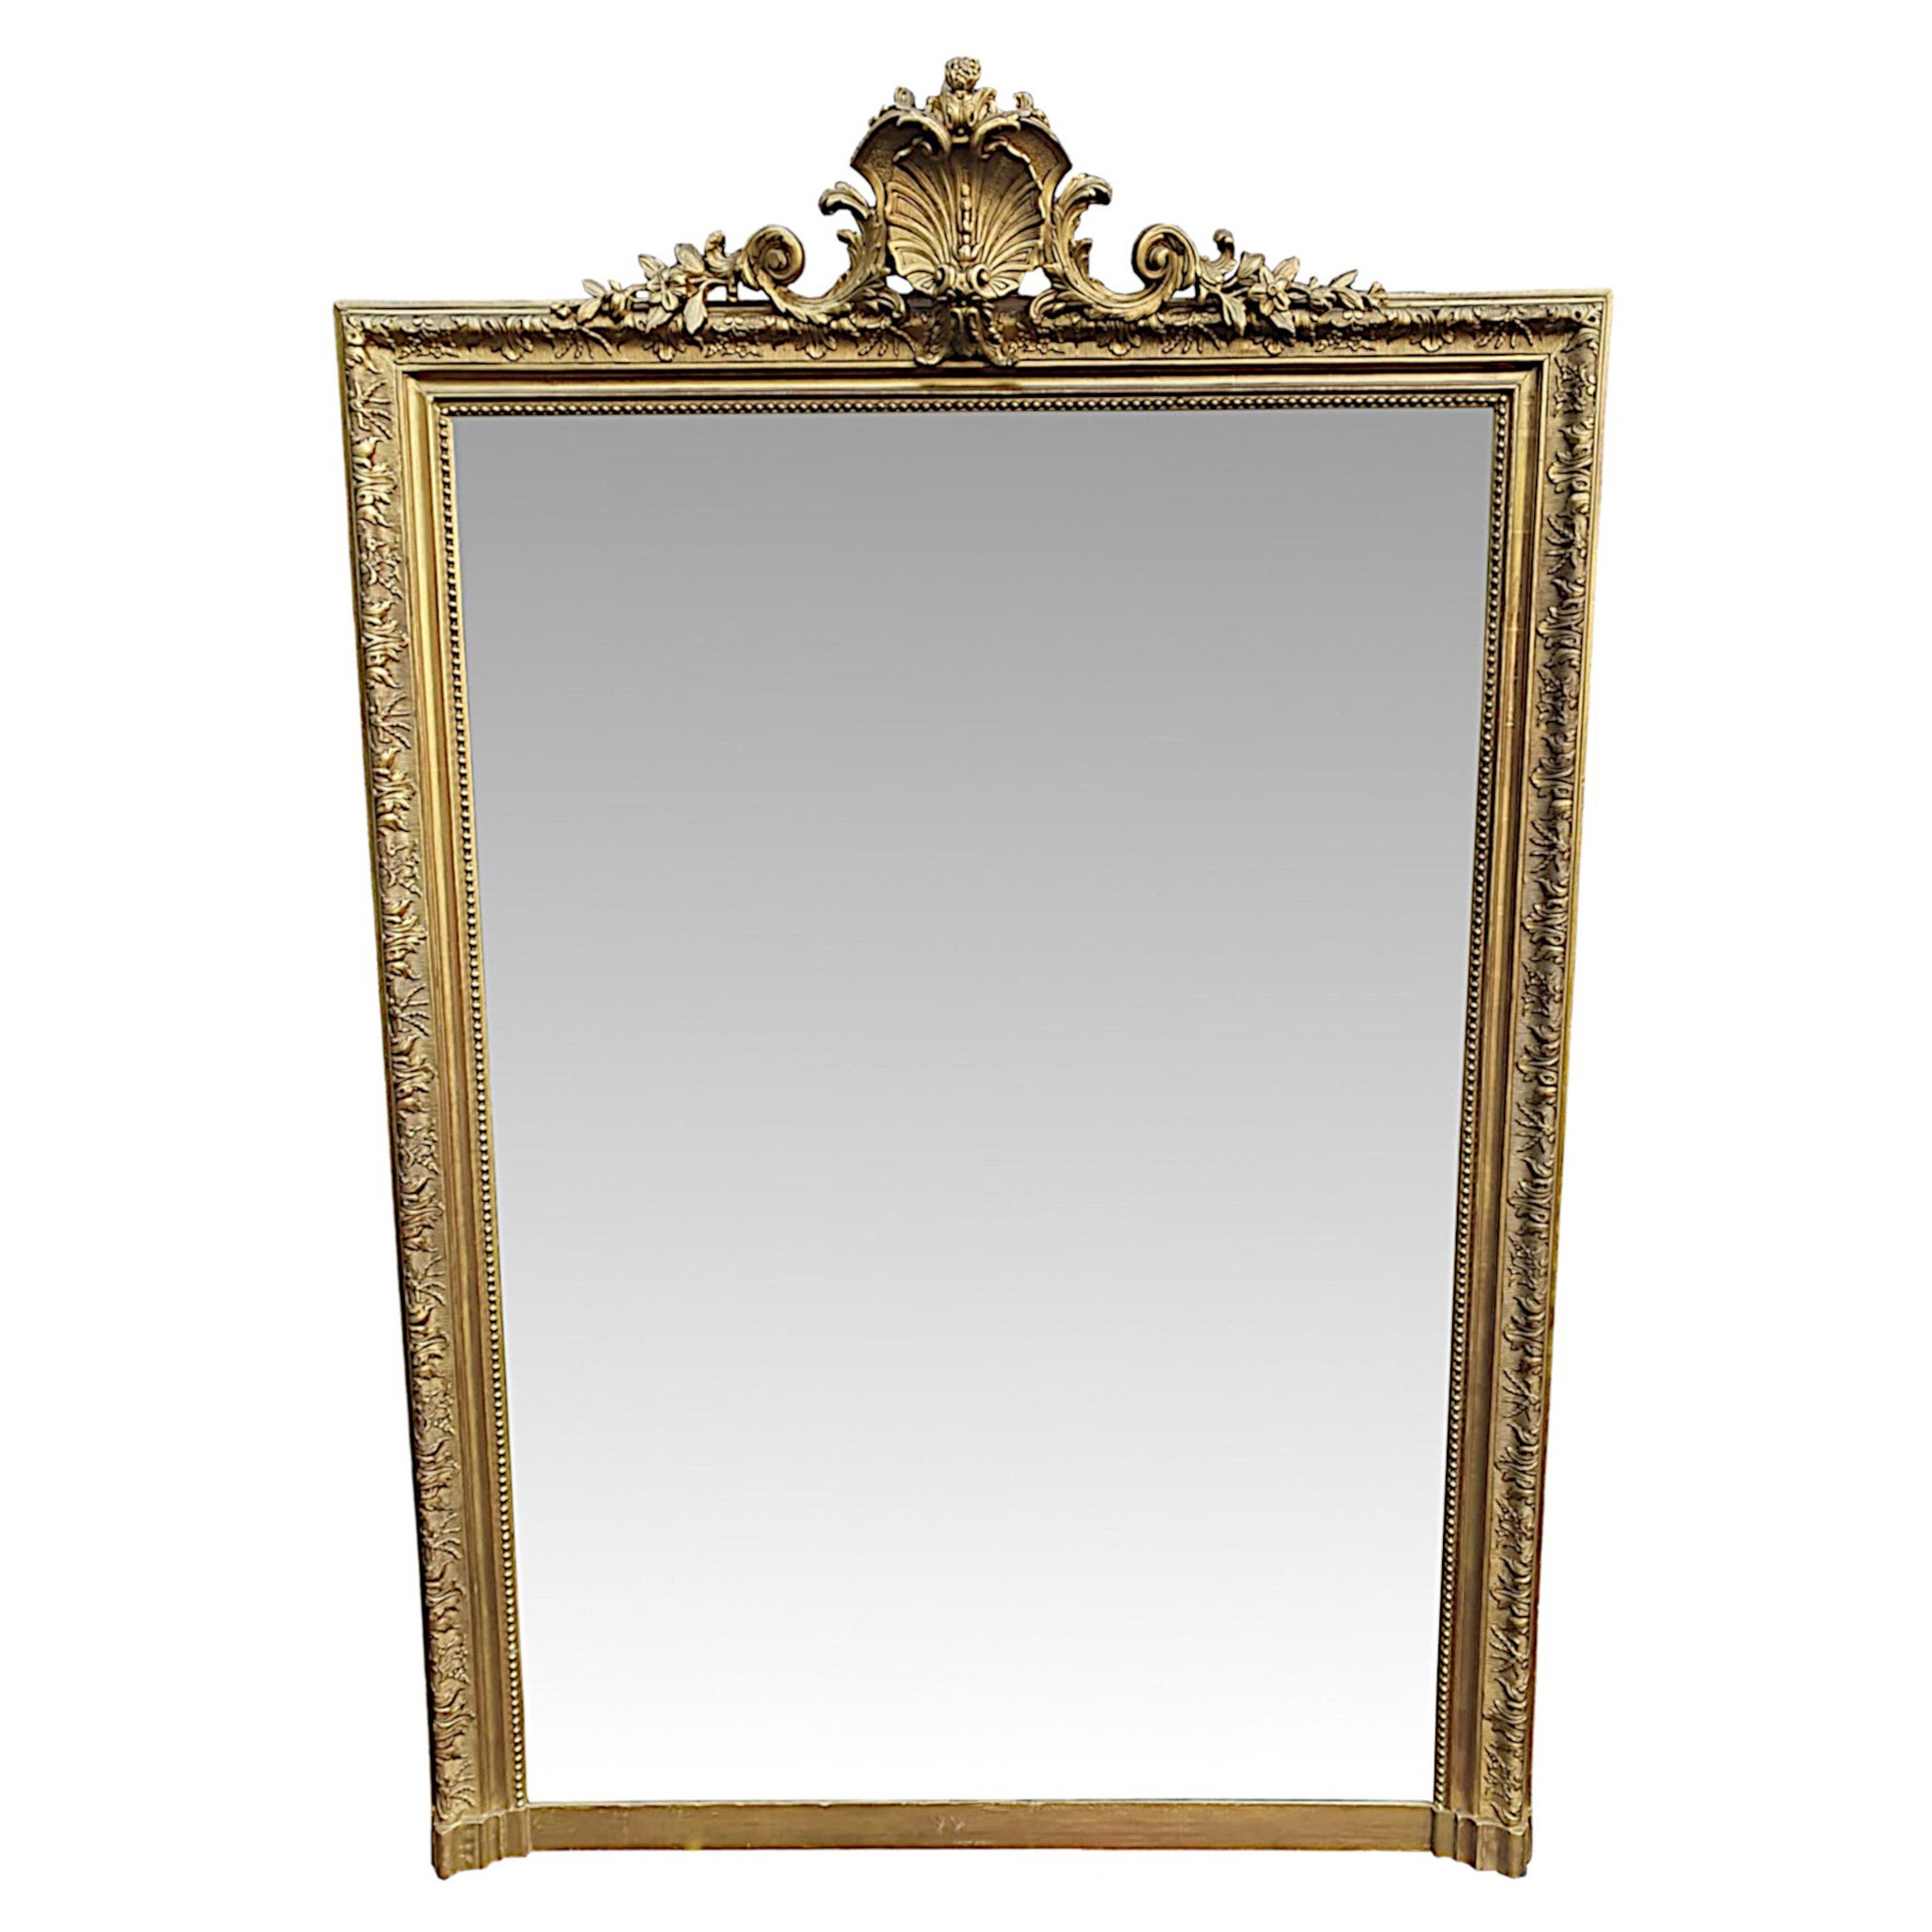 Very Fine 19th Century Giltwood Overmantle or Hall Mirror